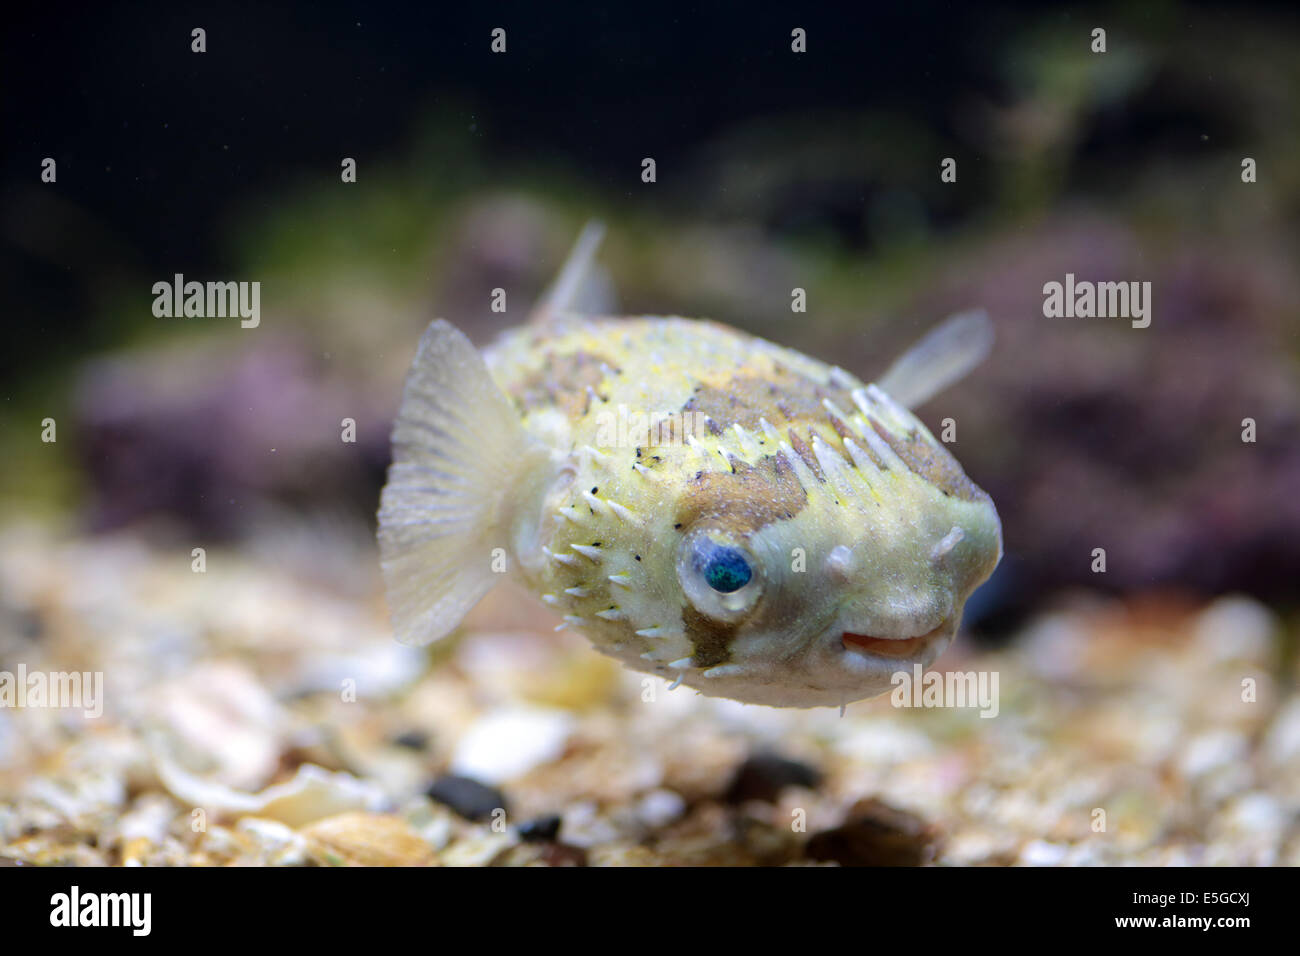 A small porcupinefish, also commonly known as blowfish, swimming near the bottom in a tank Stock Photo